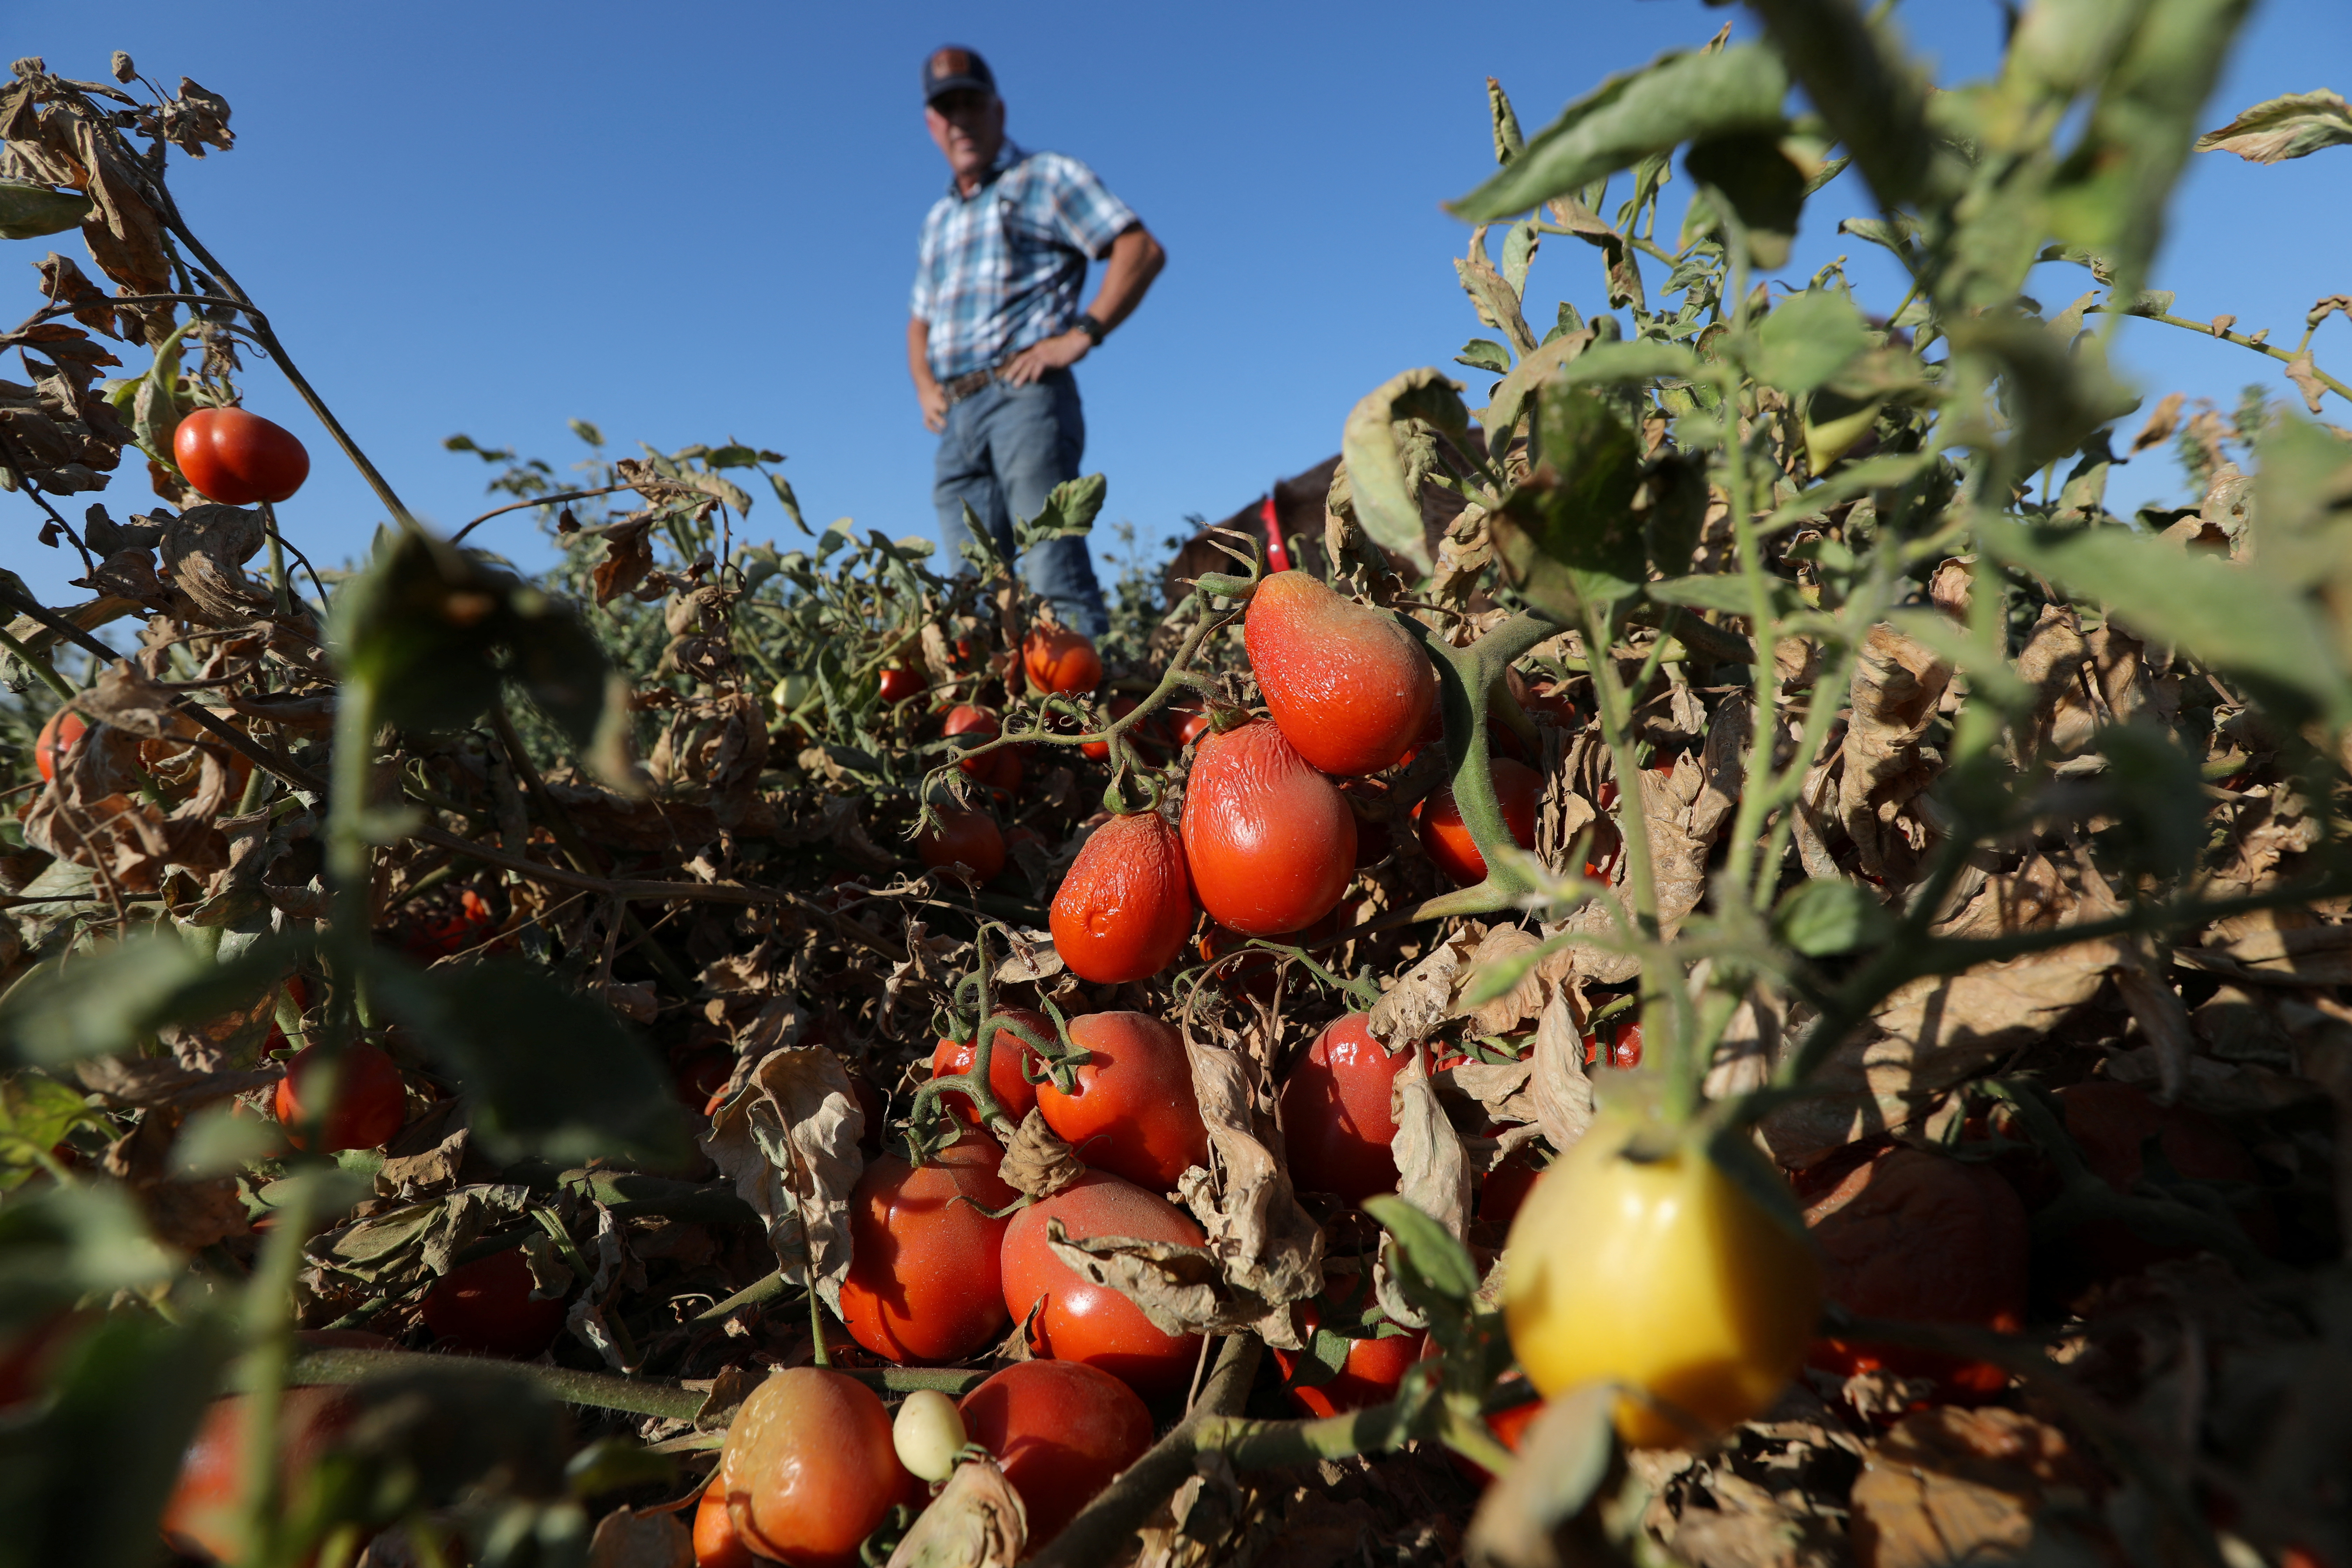 Drought cuts into California's crops, driving up farming costs